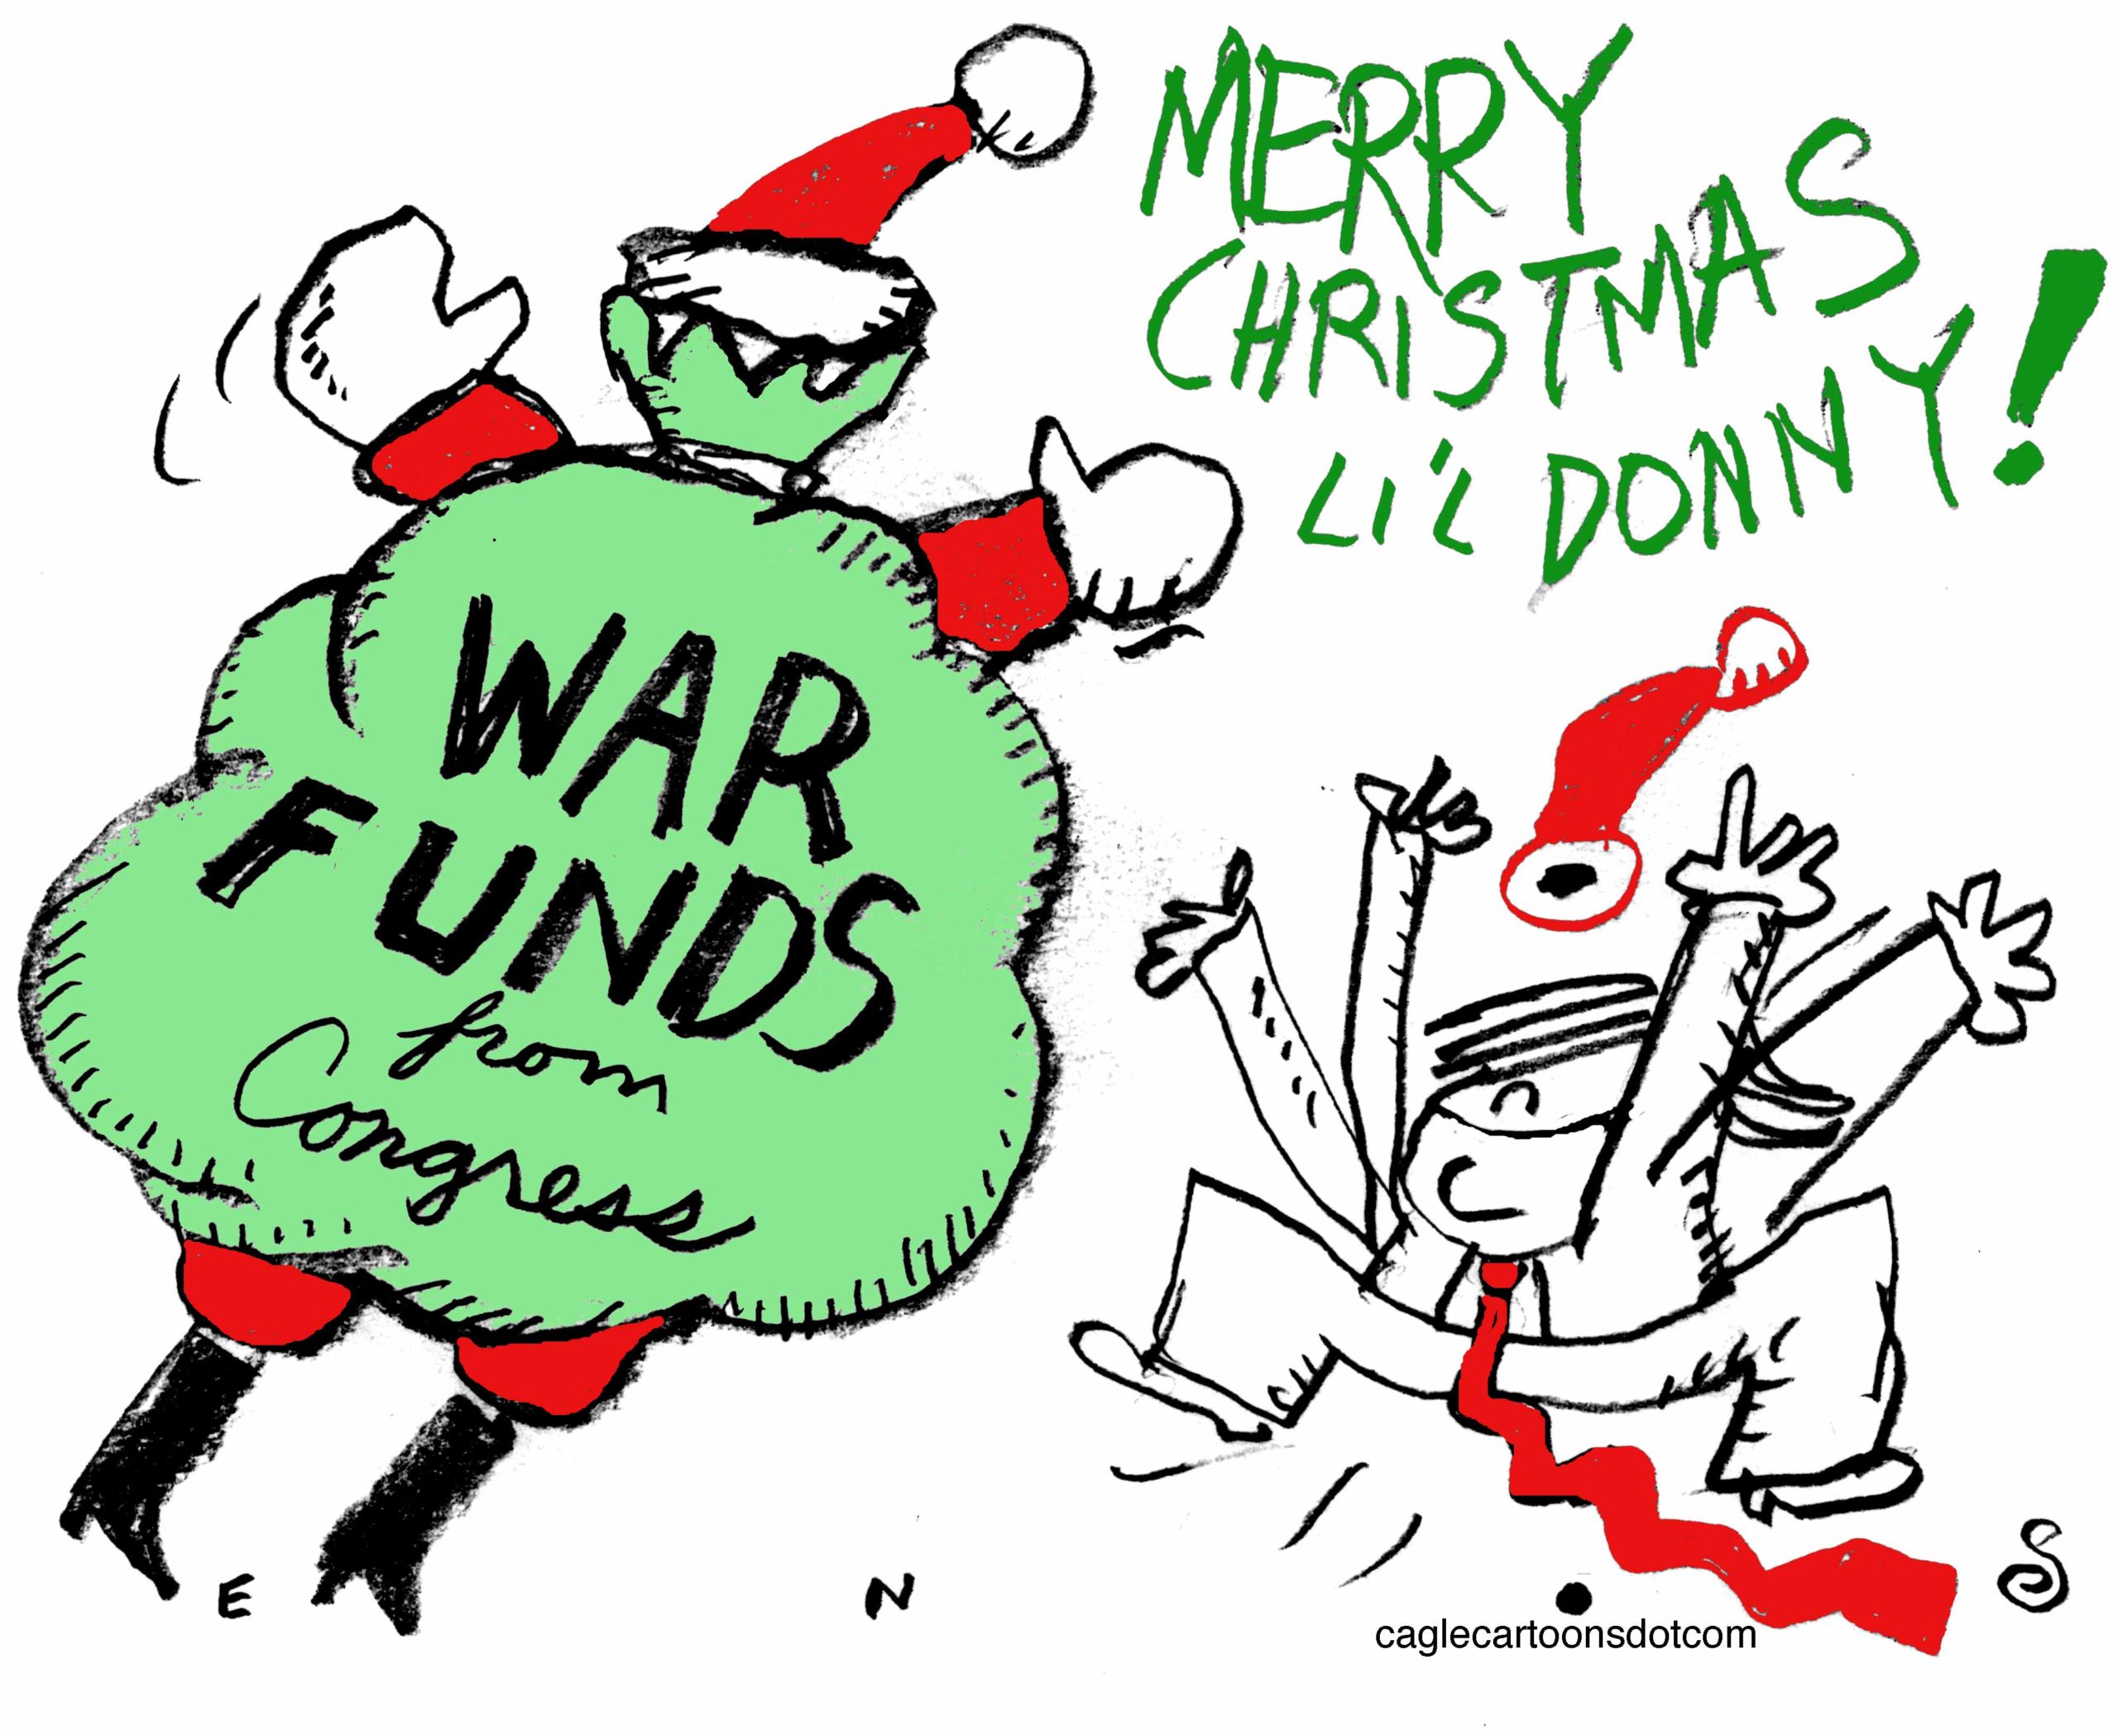 A Christmas-themed cartoon about war funds and Donald Trump.